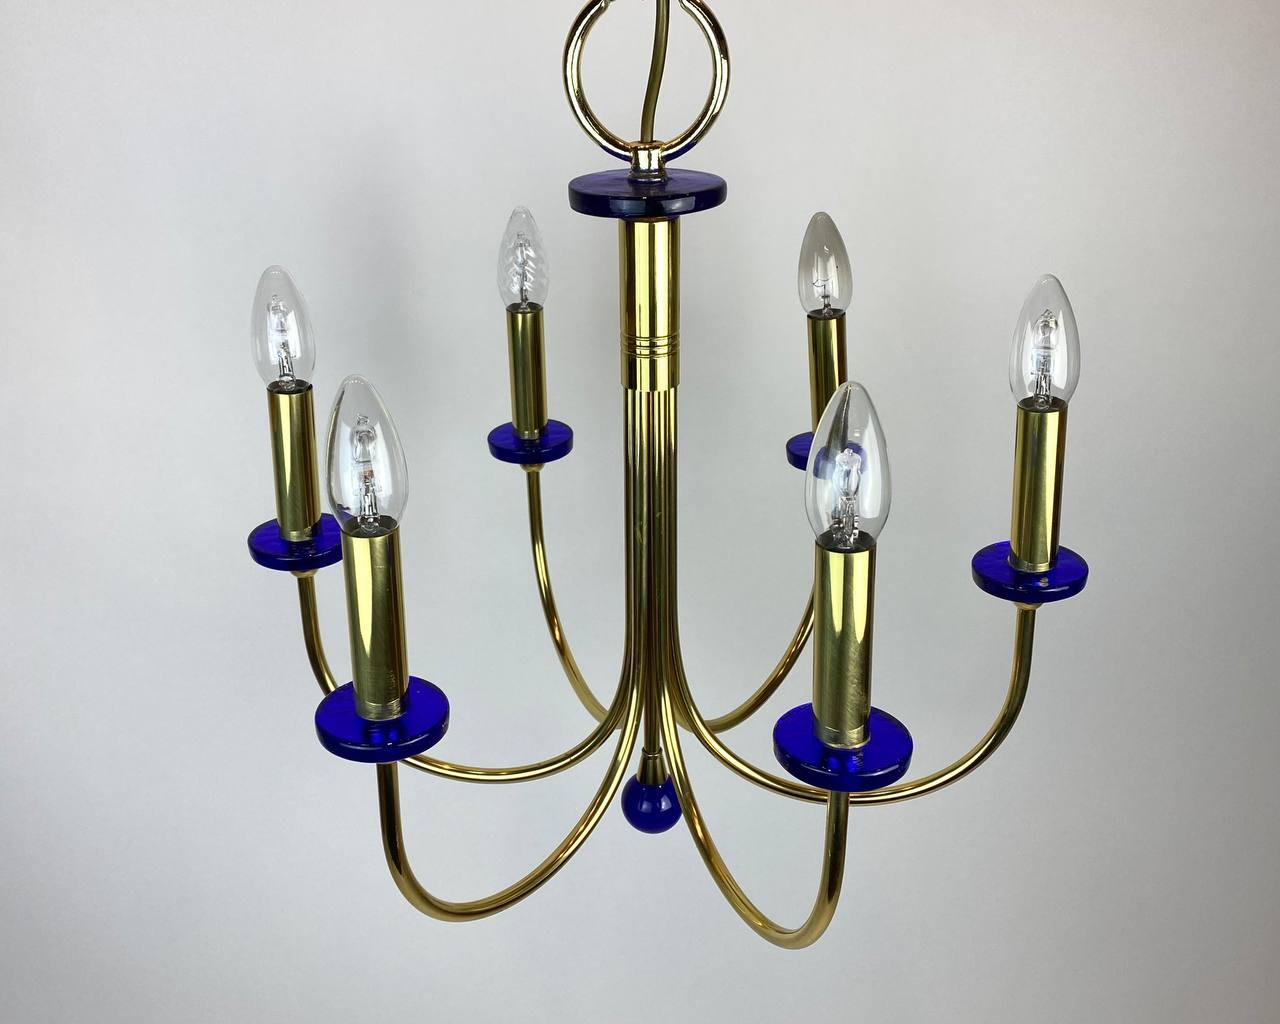 Vintage chandelier from Famous German Manufacture - Asmuth Leuchten.

This chandelier made of Cobalt Glass and Gilding.

1970’s.

Vintage.

For 6 lamps E-14.

Exellent condition.

Size:

Height - 31.1 in 79 cm.

Diameter - 18.9 in 48